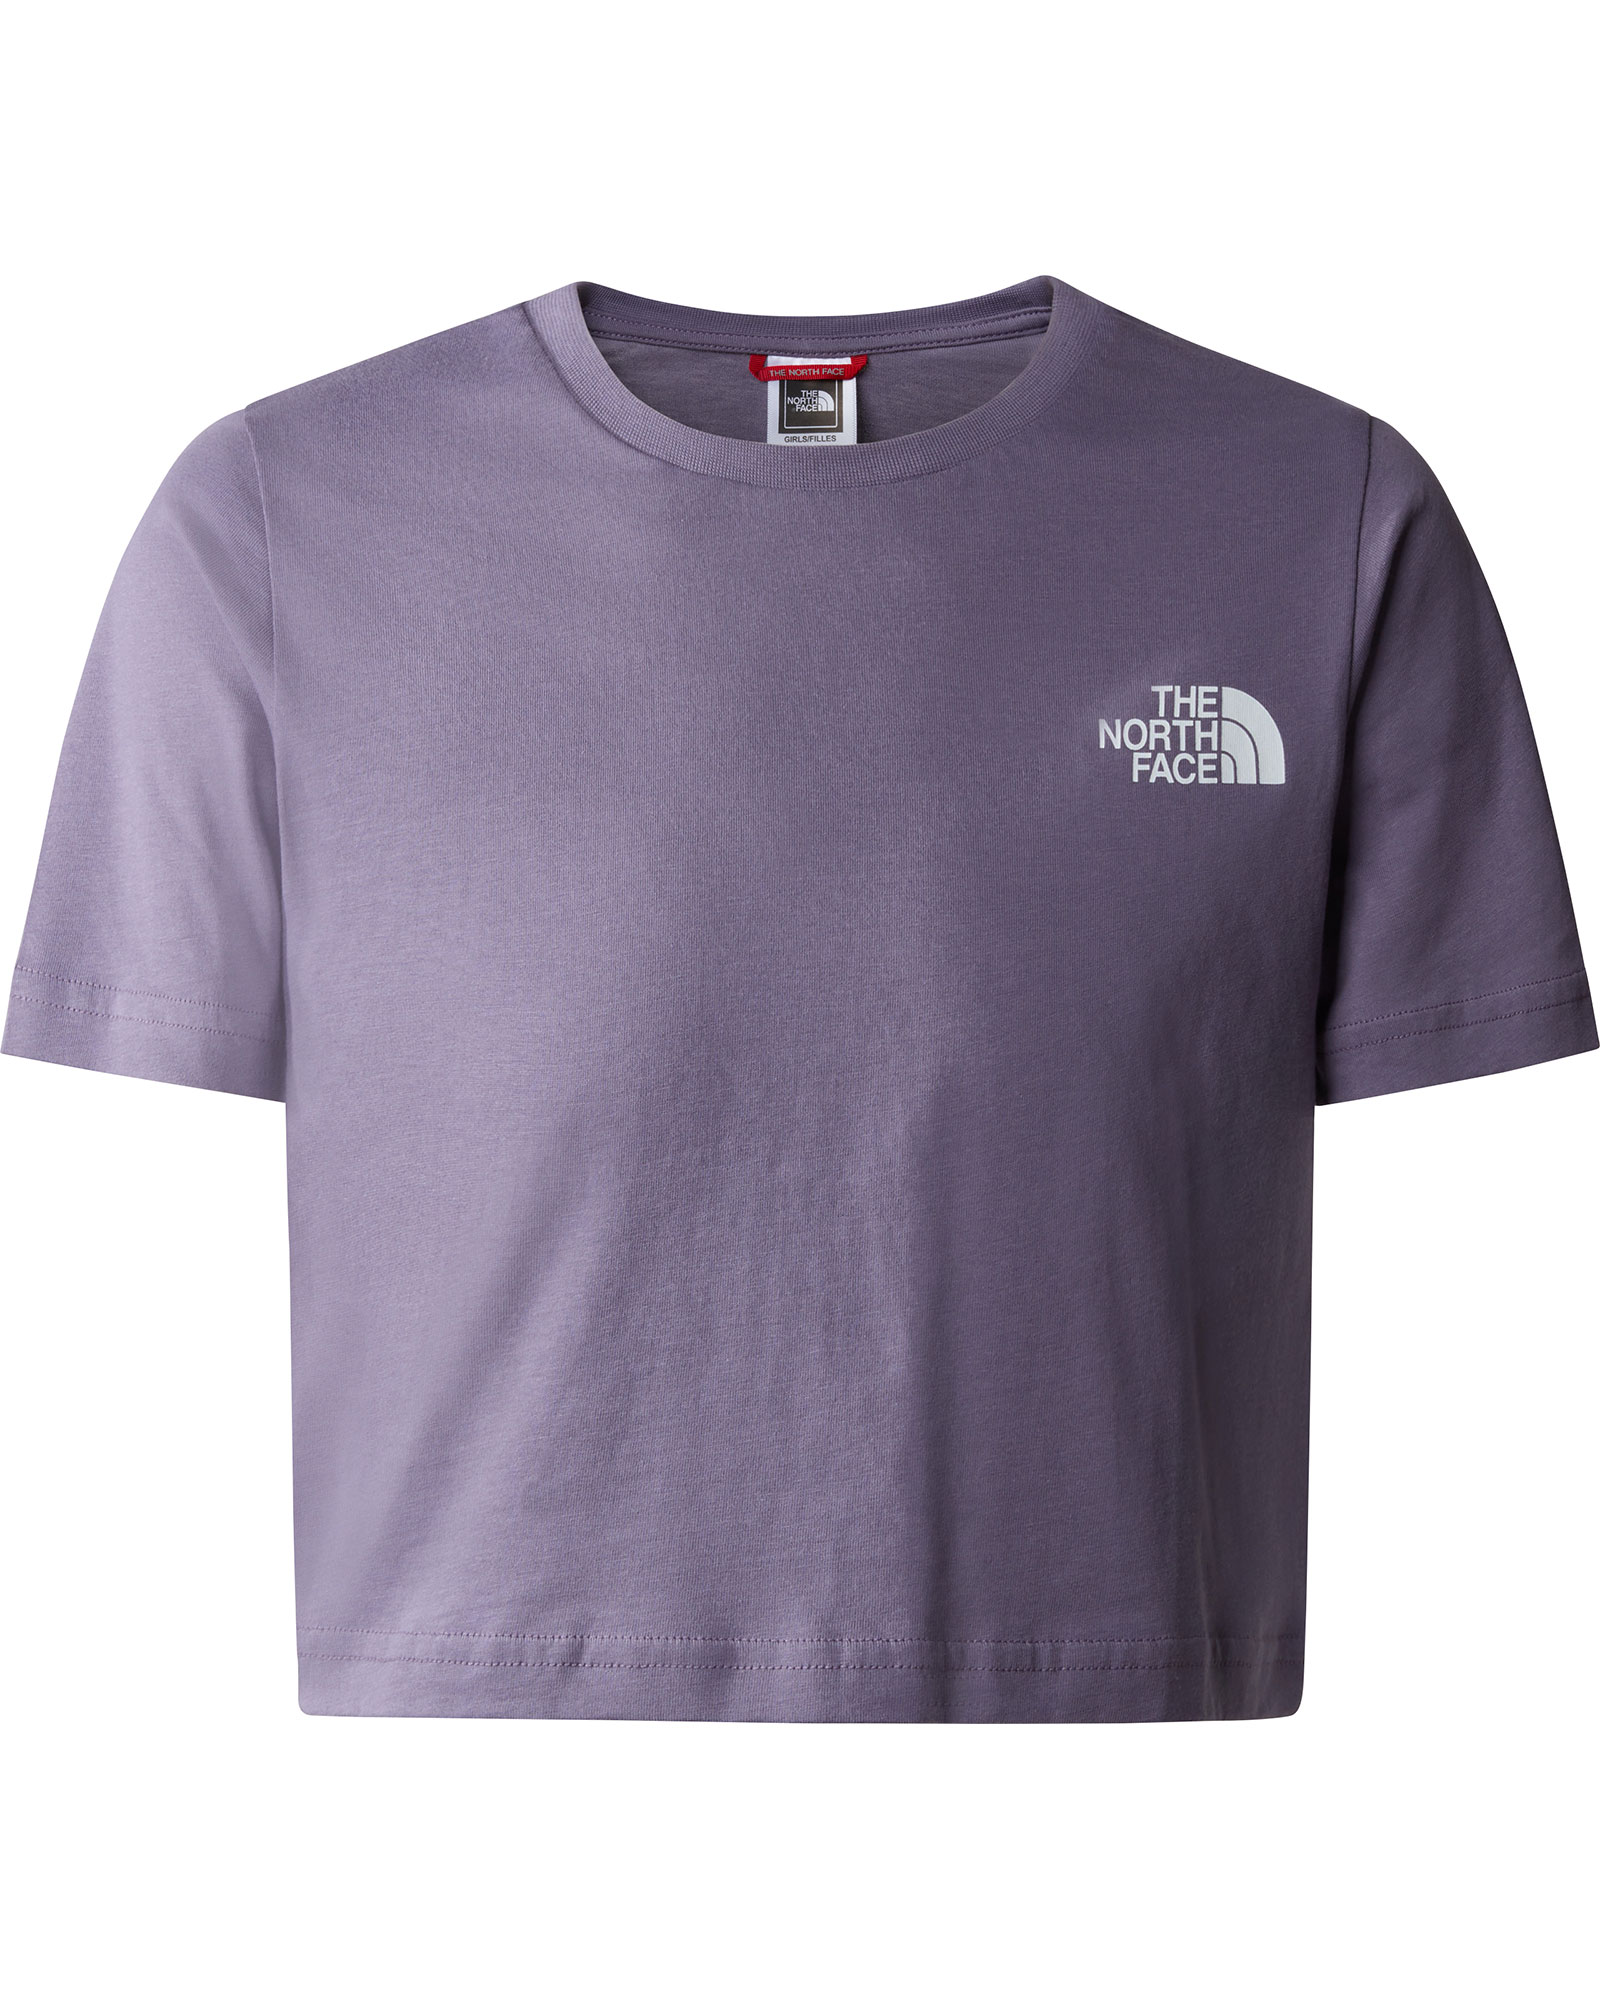 The North Face Girl’s Crop Simple Dome T Shirt - Lunar Slate S